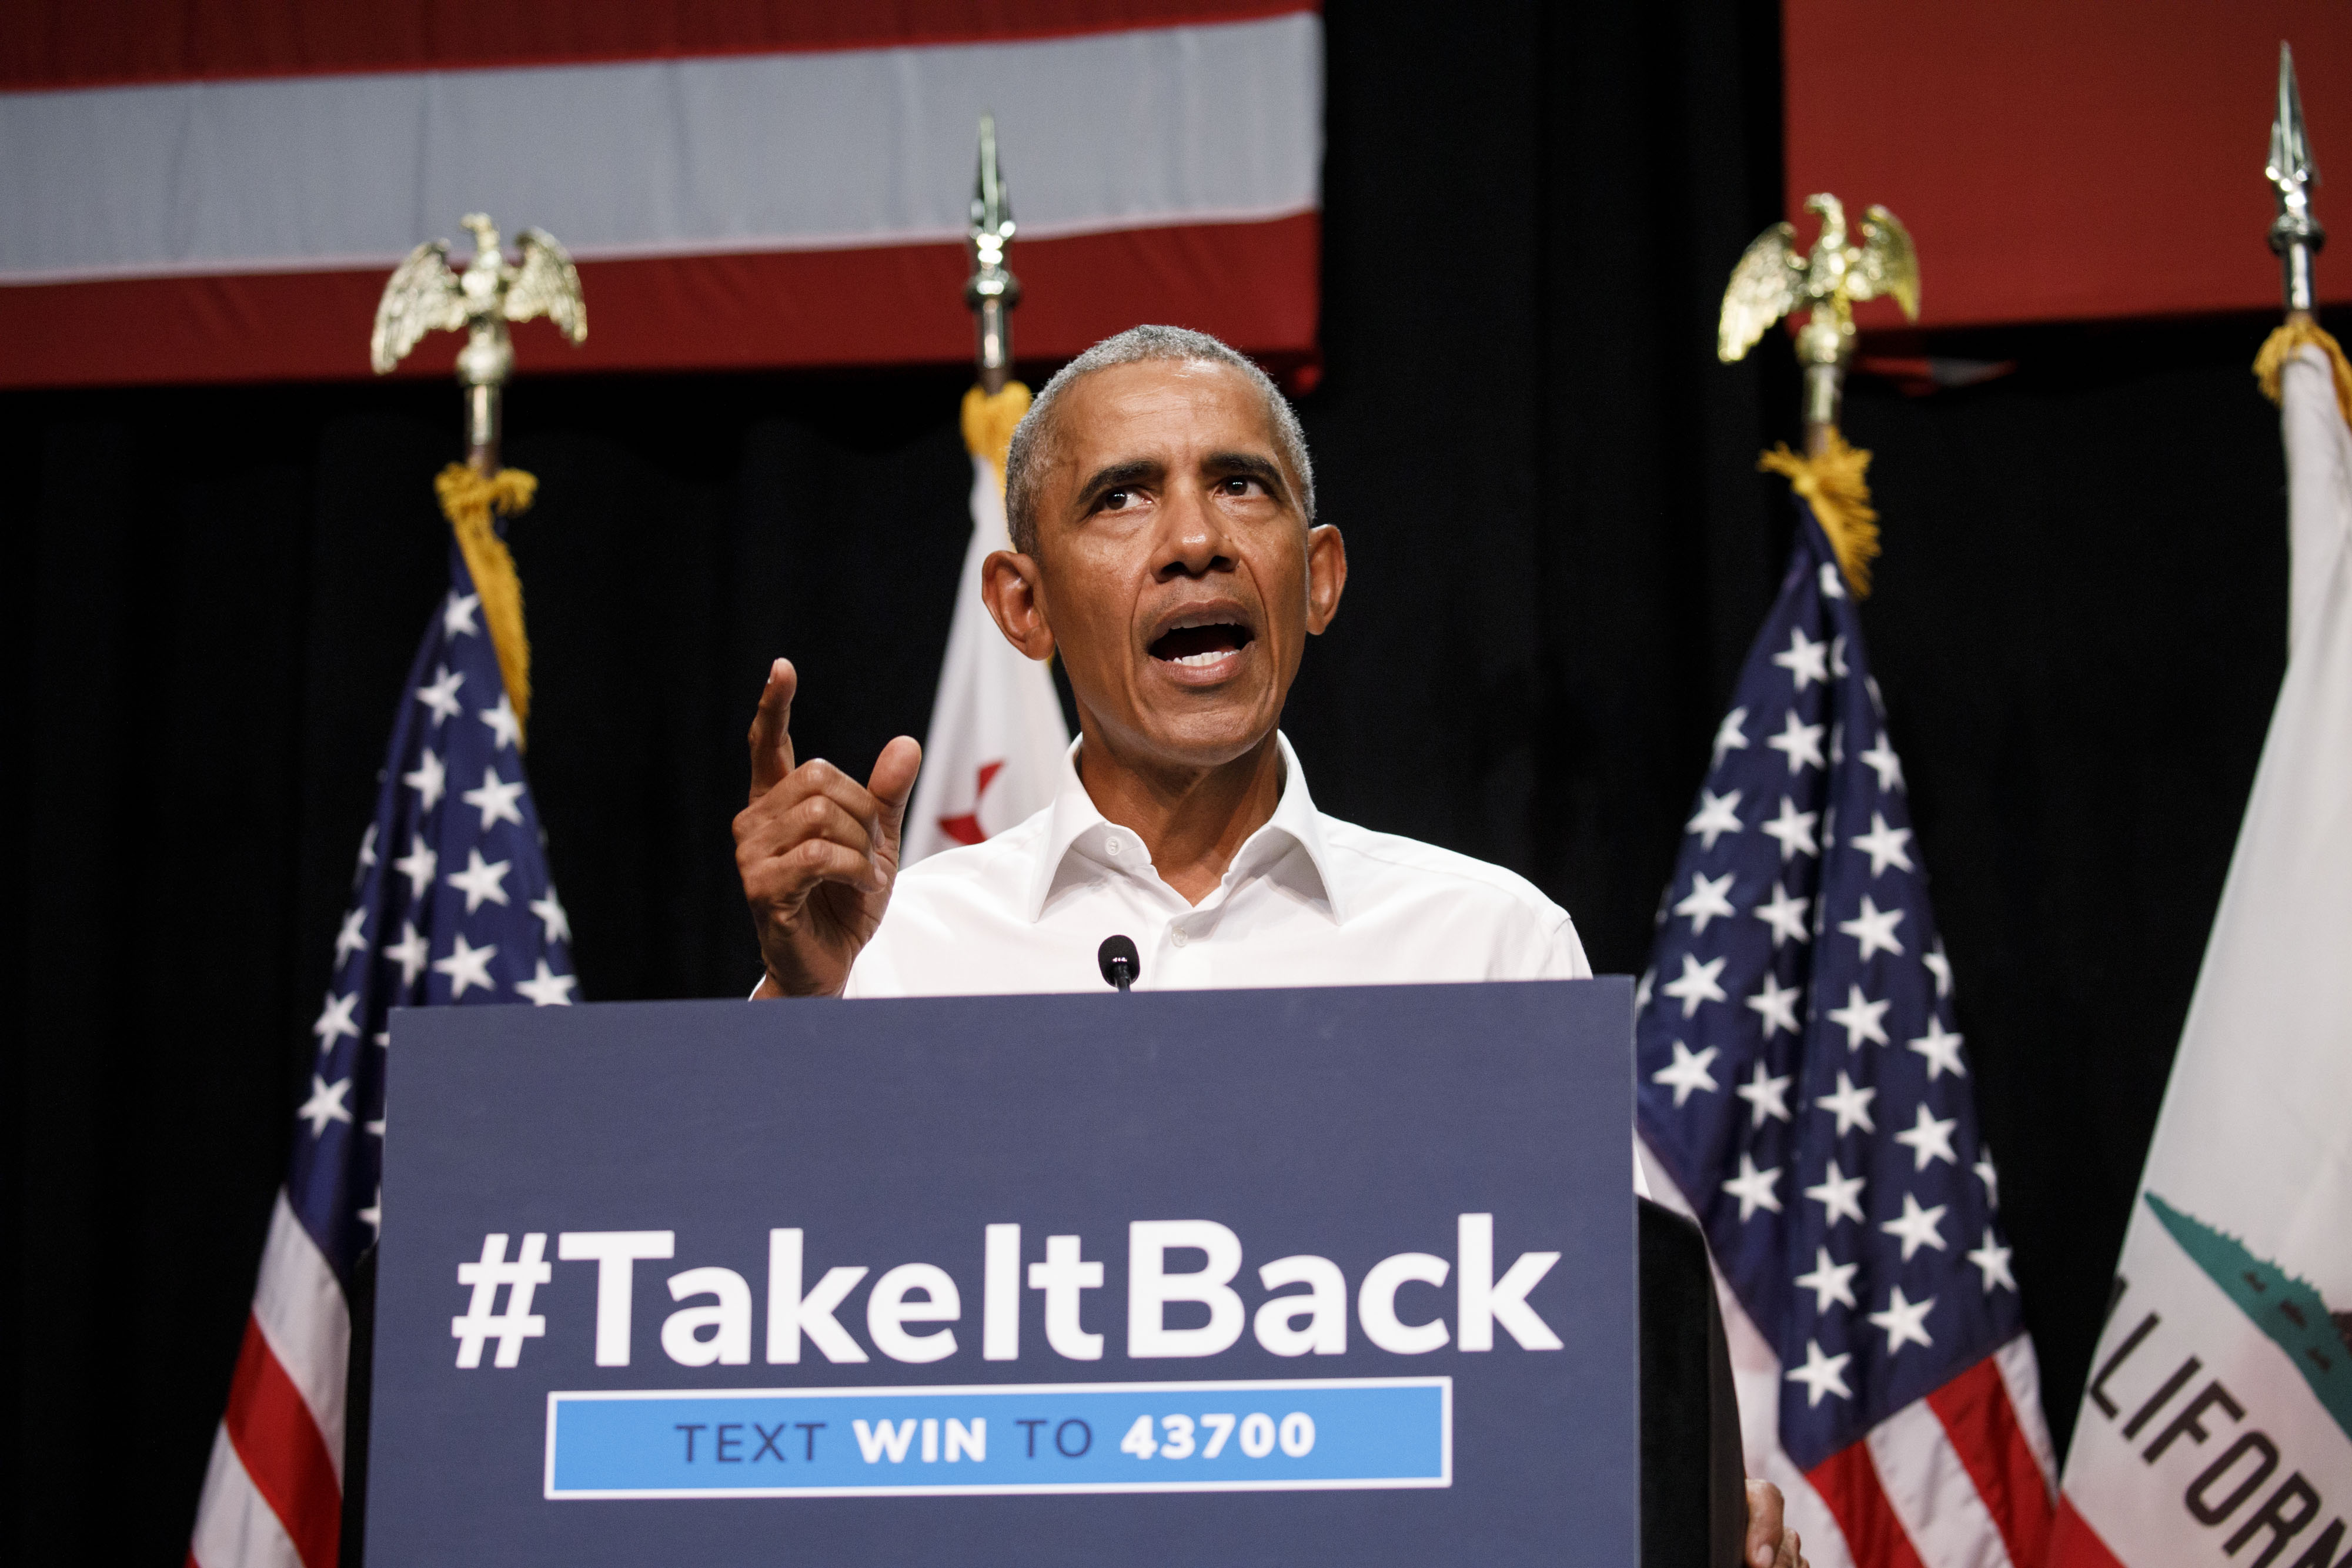 Obama speaks during a campaign rally in Anaheim, California on Sept. 8.